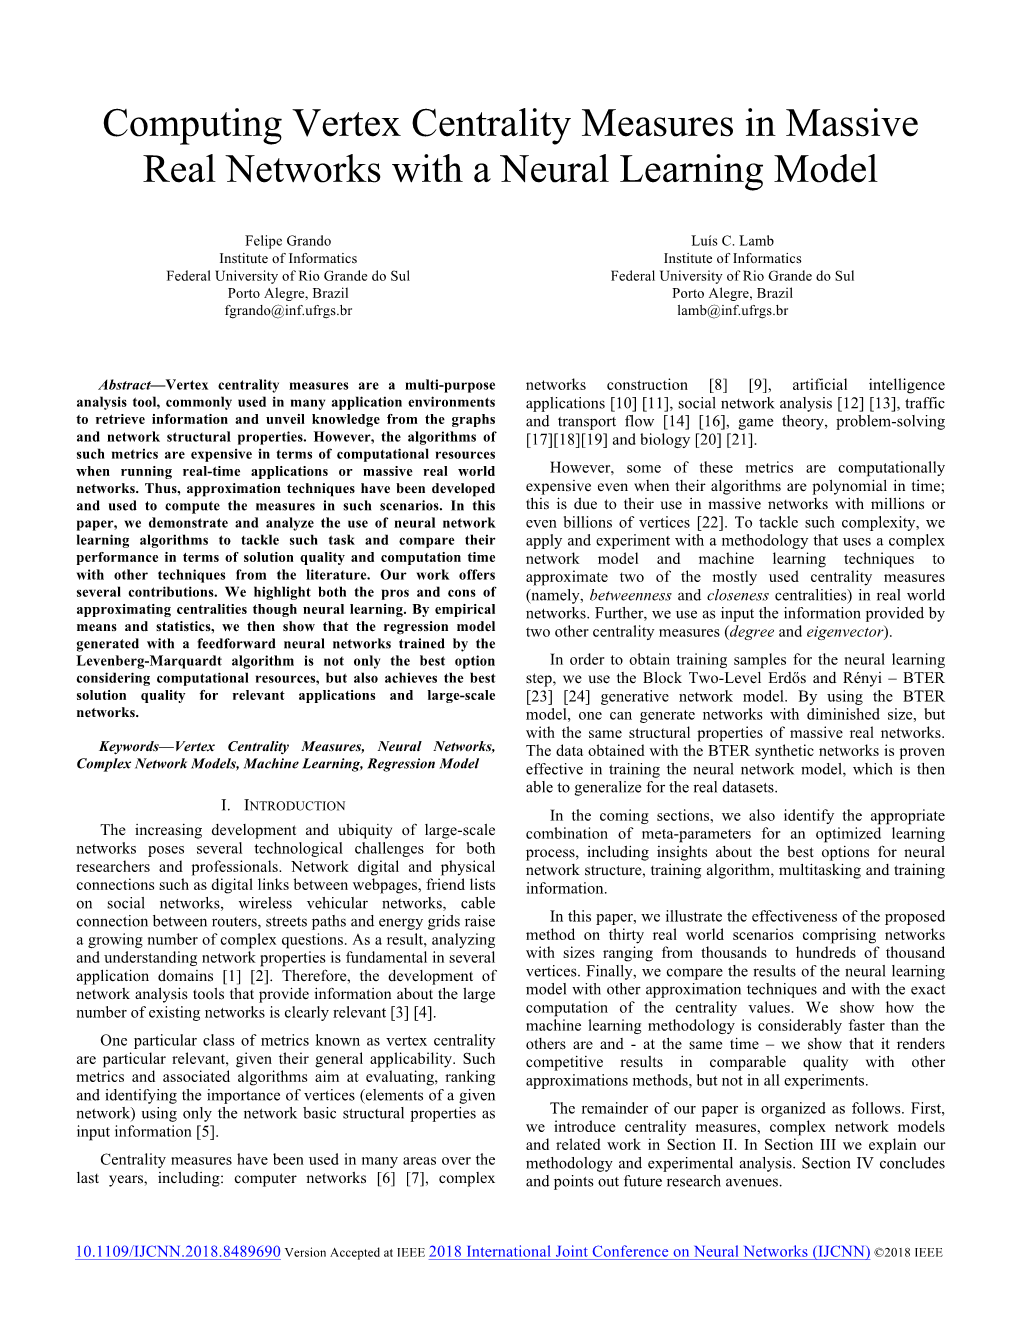 Computing Vertex Centrality Measures in Massive Real Networks with a Neural Learning Model